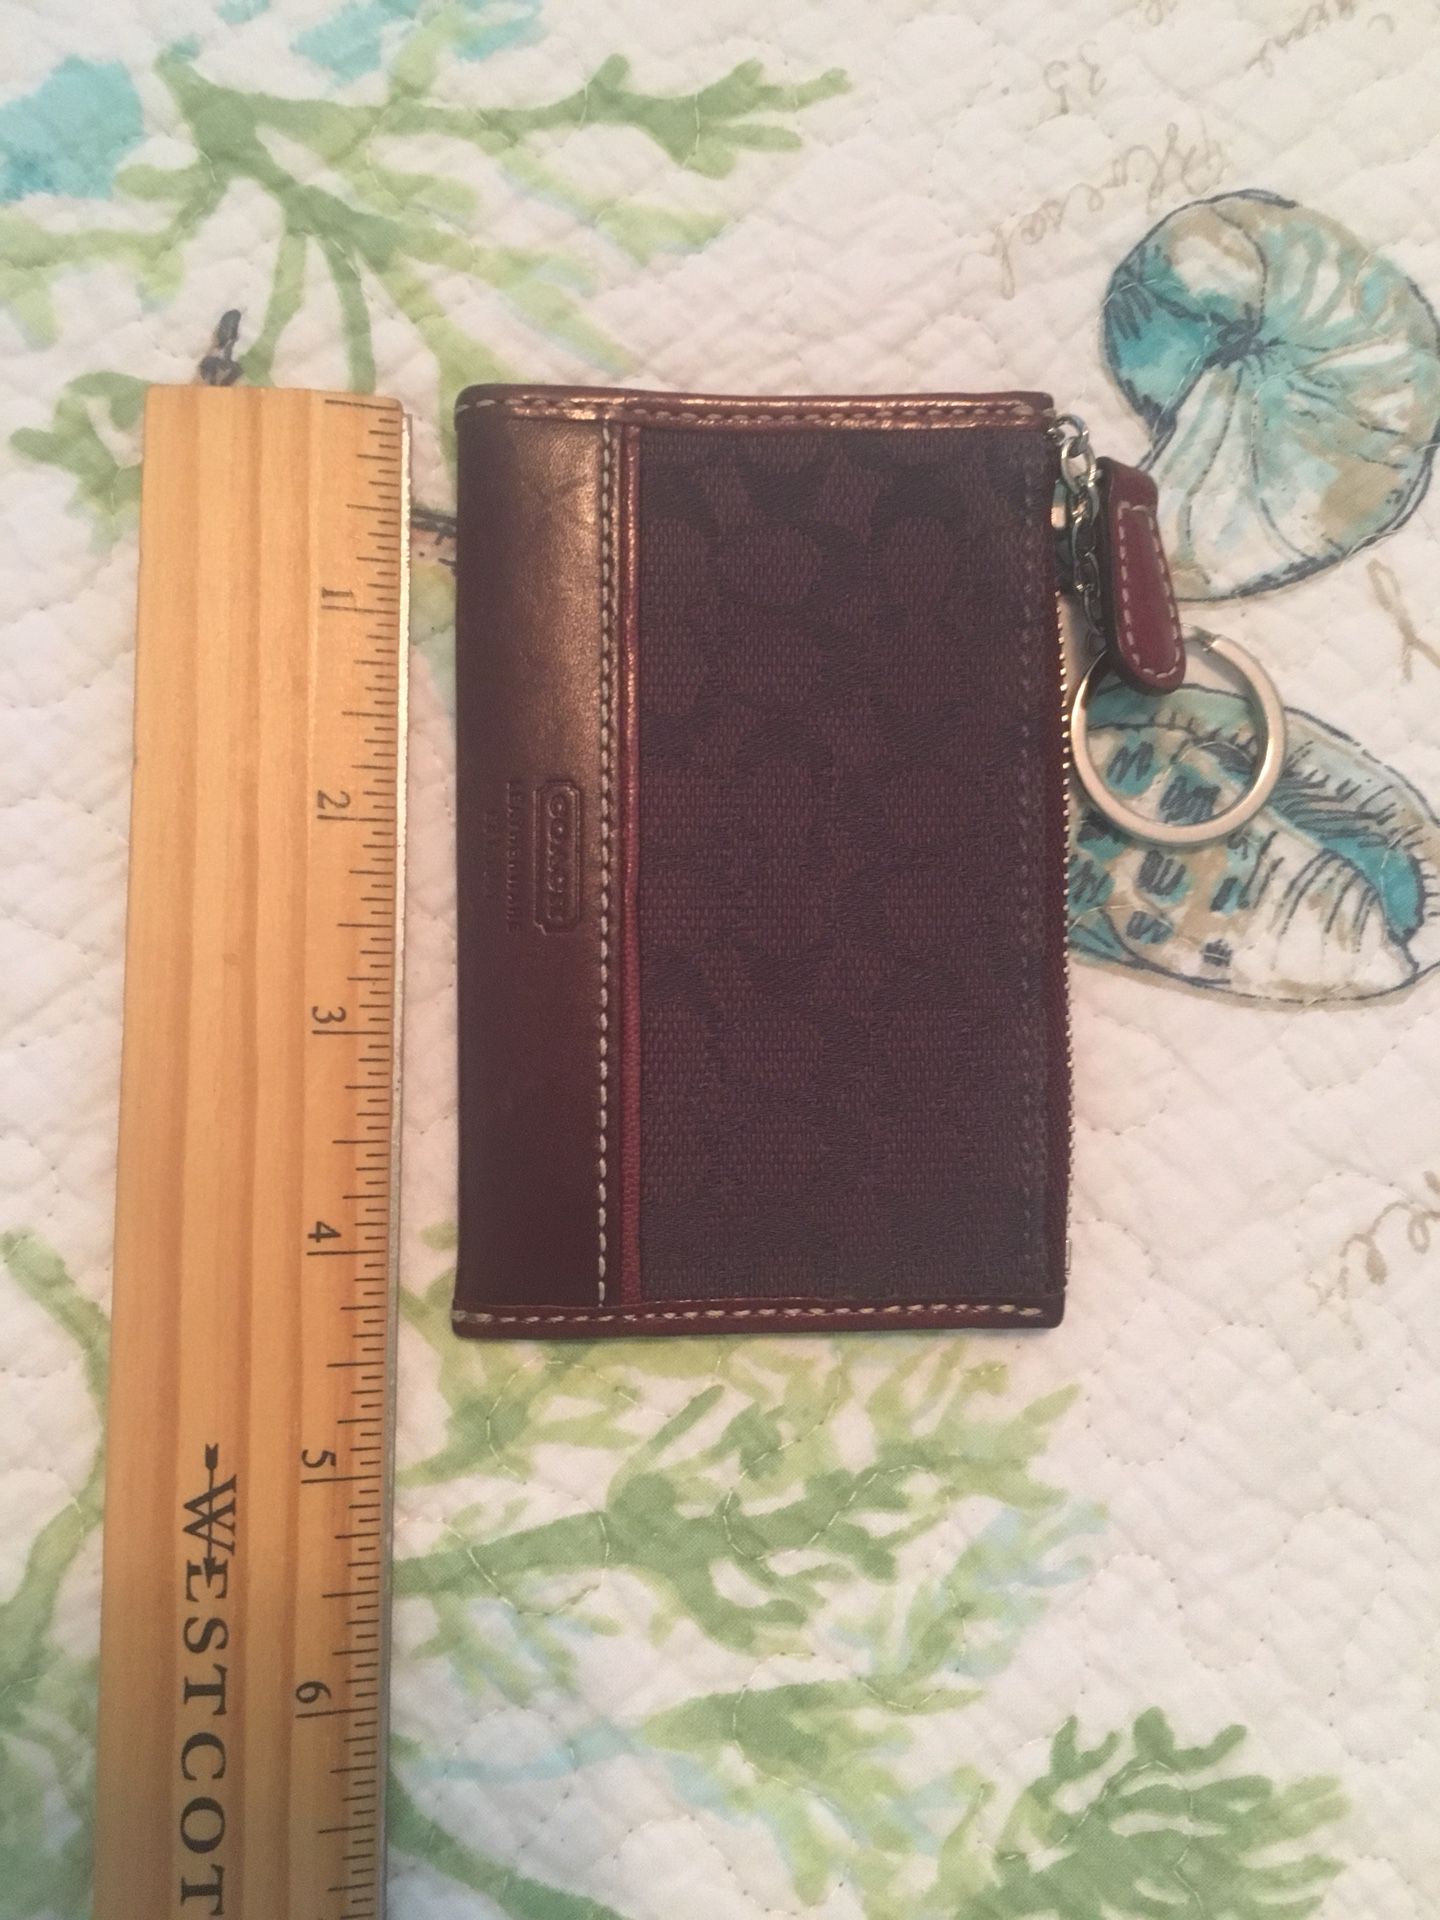 Coach Purse And Skinny Id Case for Sale in Temecula, CA - OfferUp